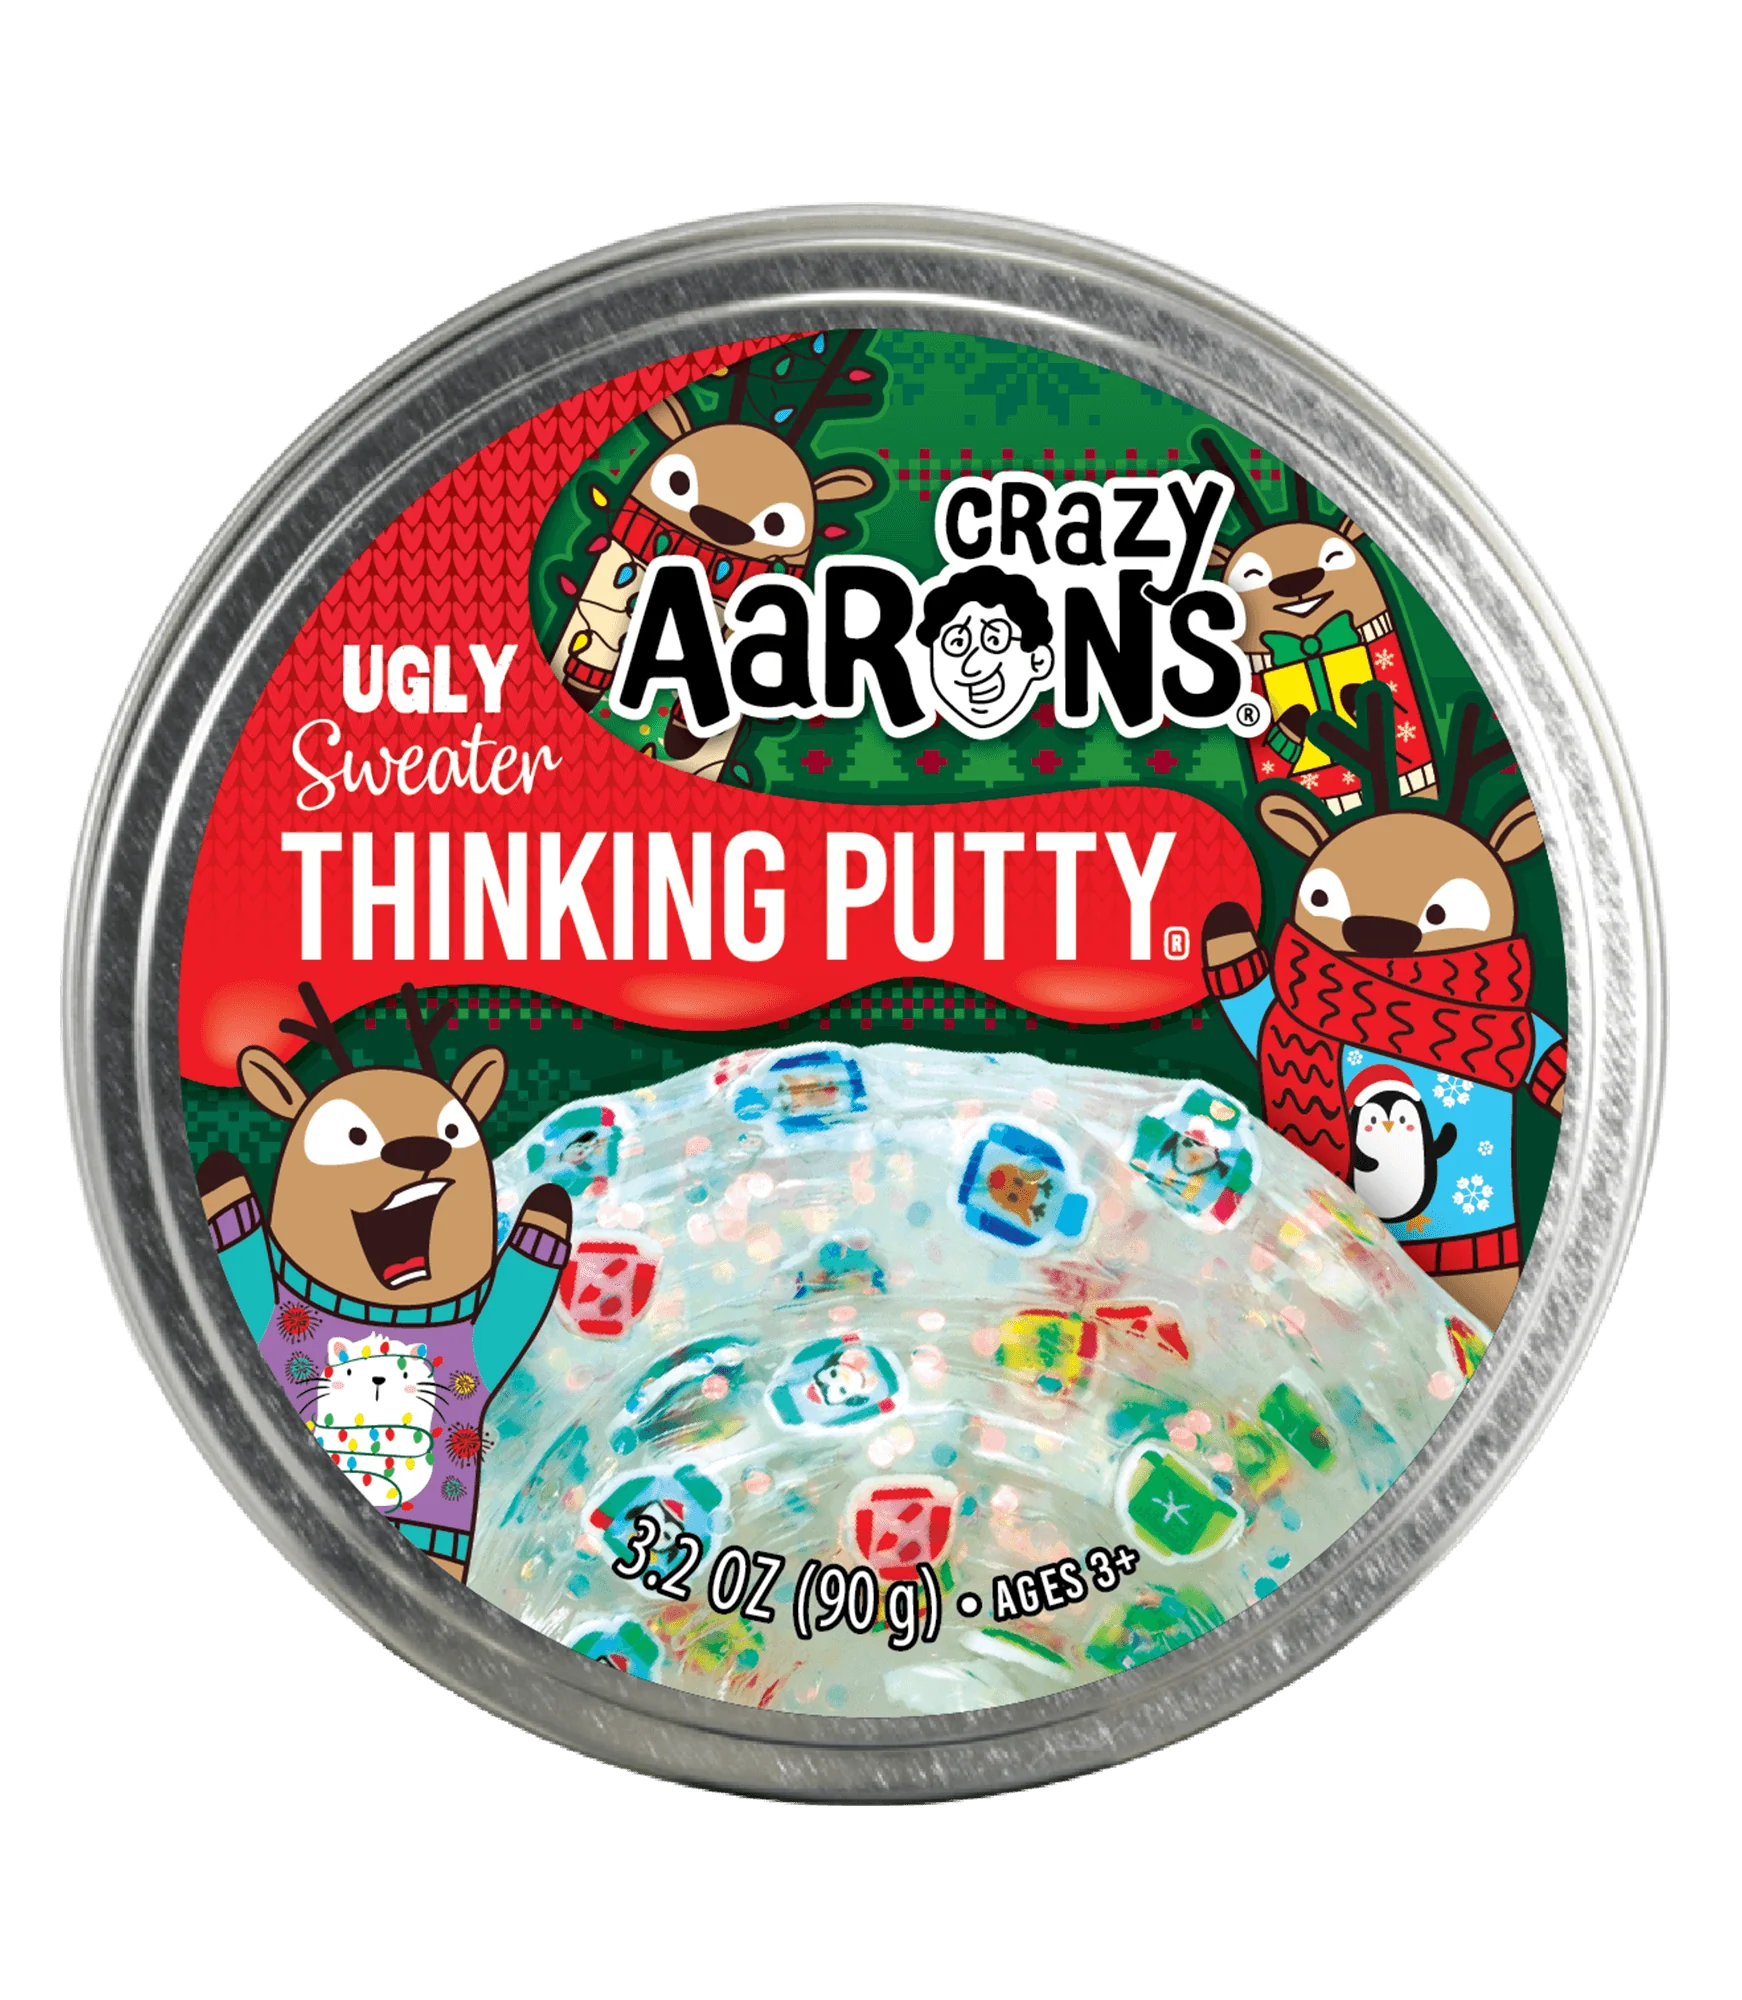 crazy aaron’s thinking putty - ugly sweater